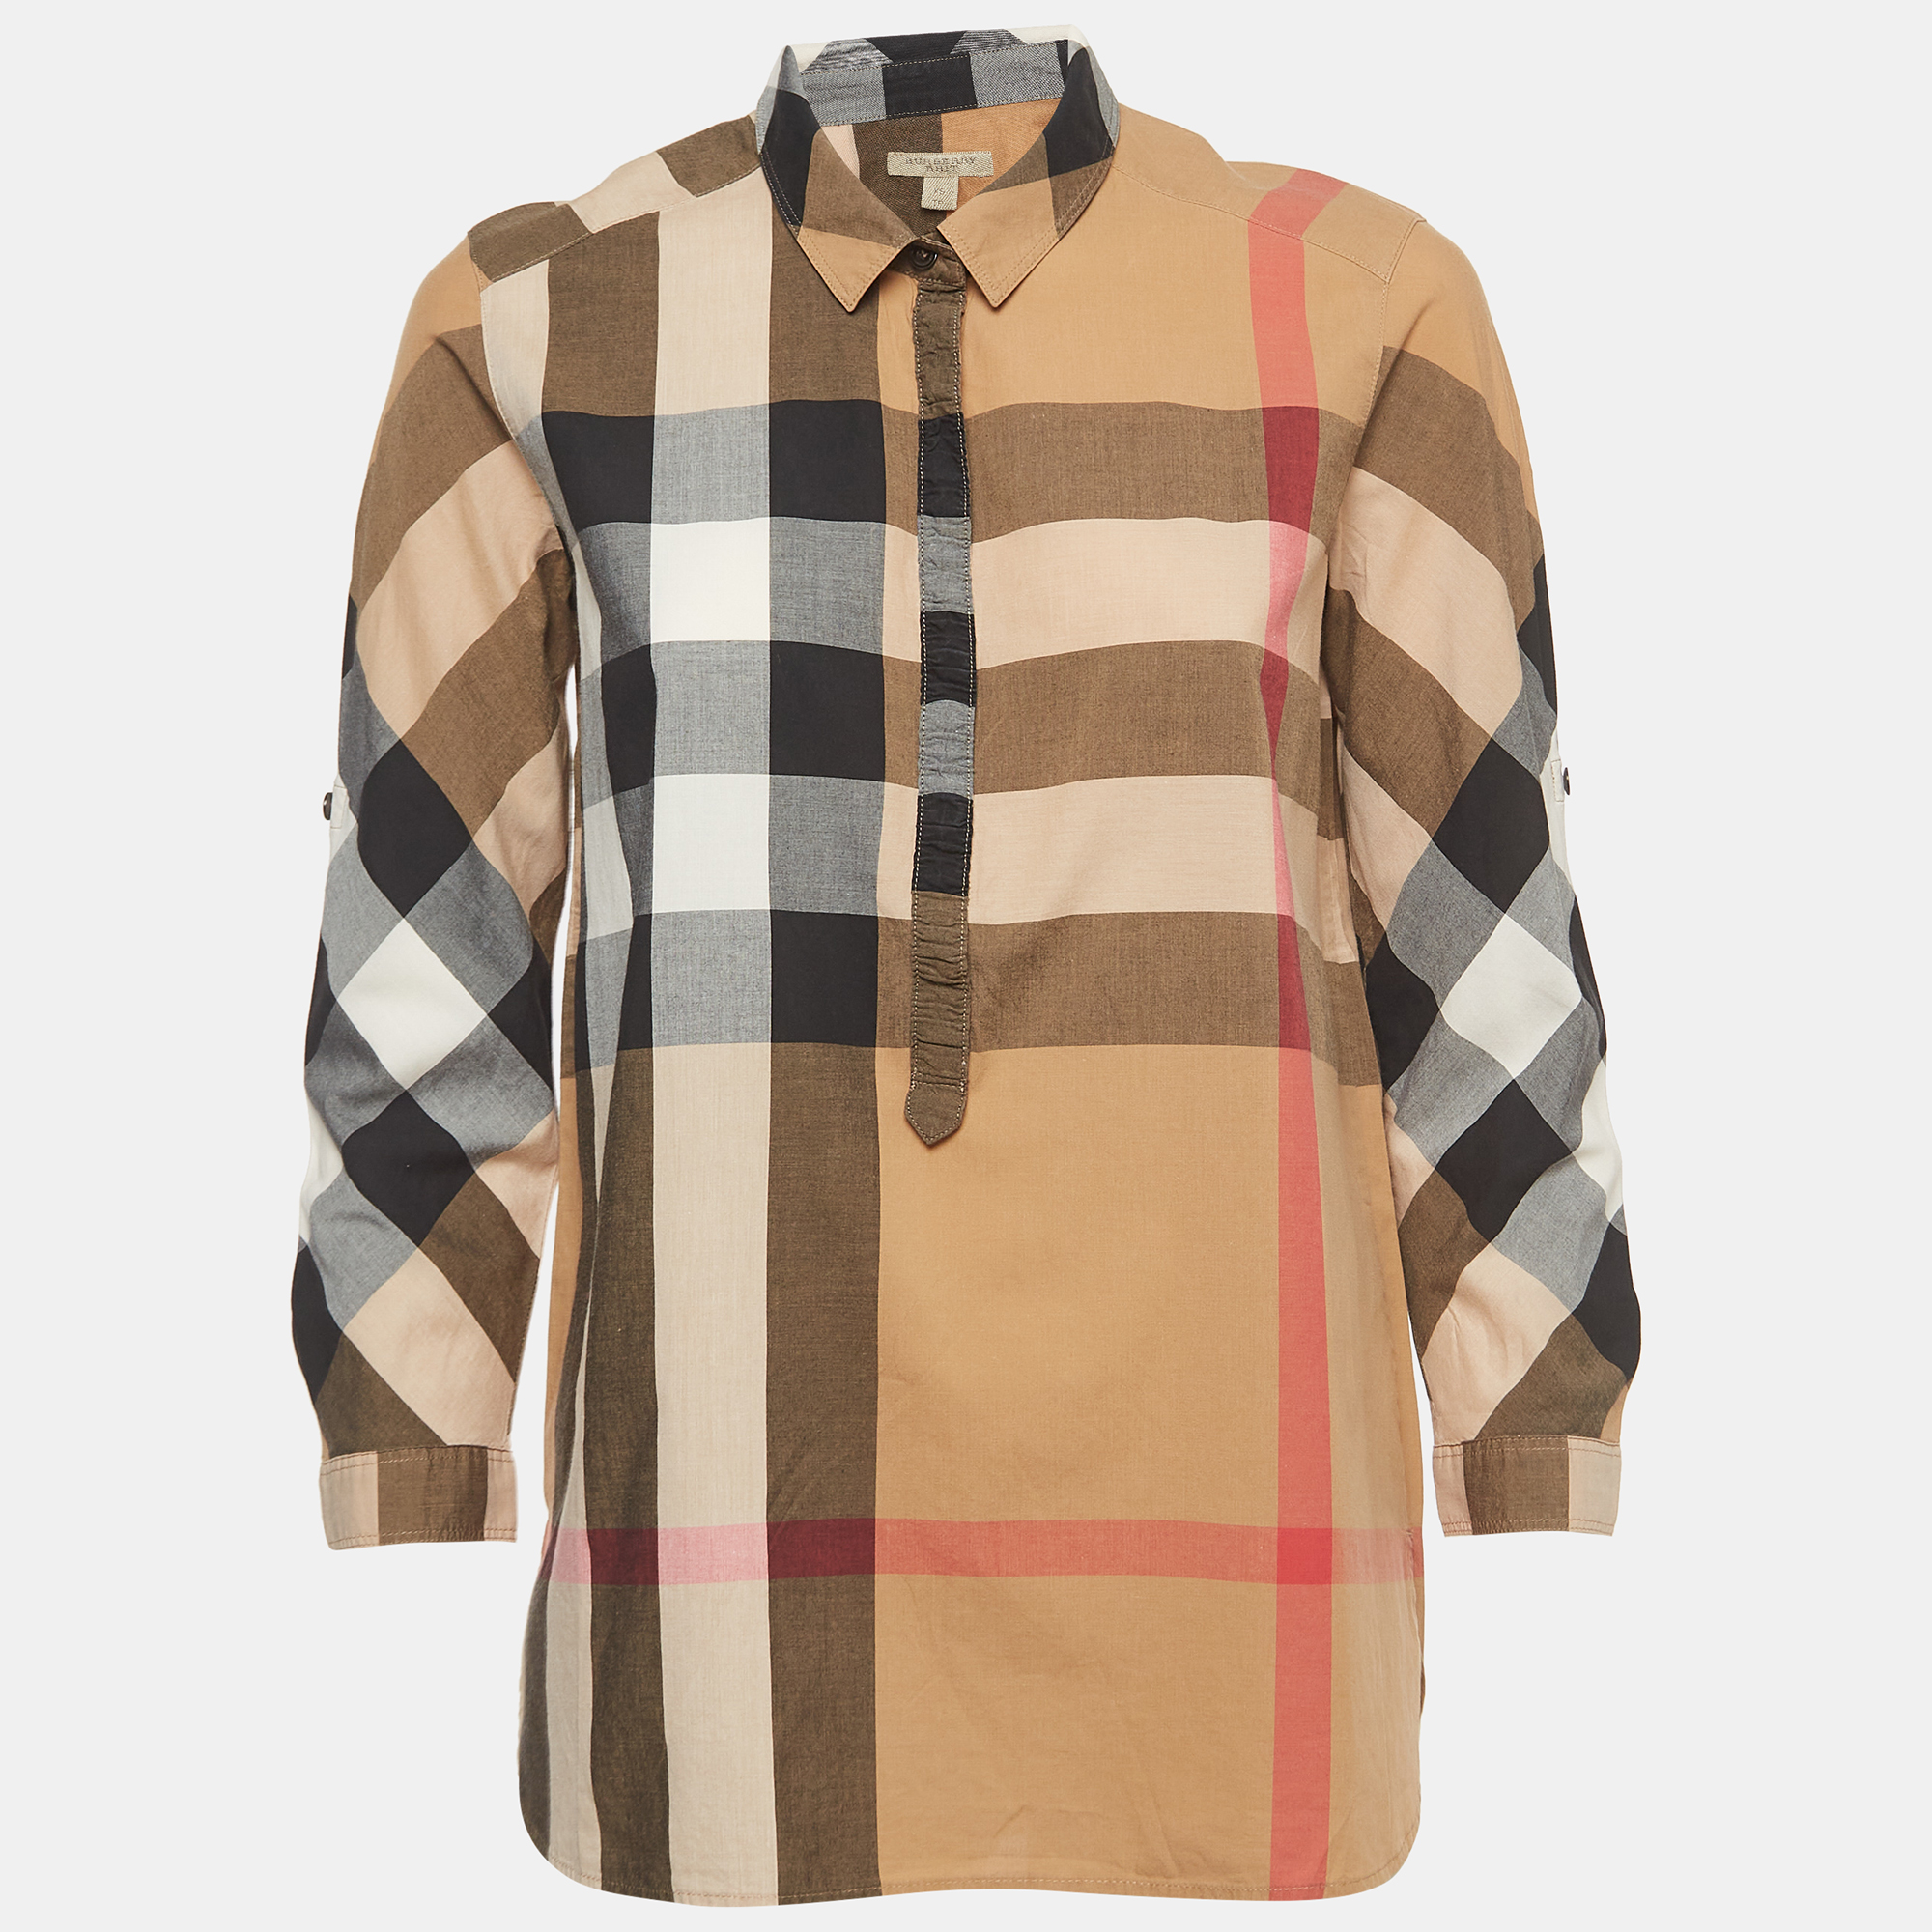 Burberry Brit Beige Checked Printed Cotton Shirt XS